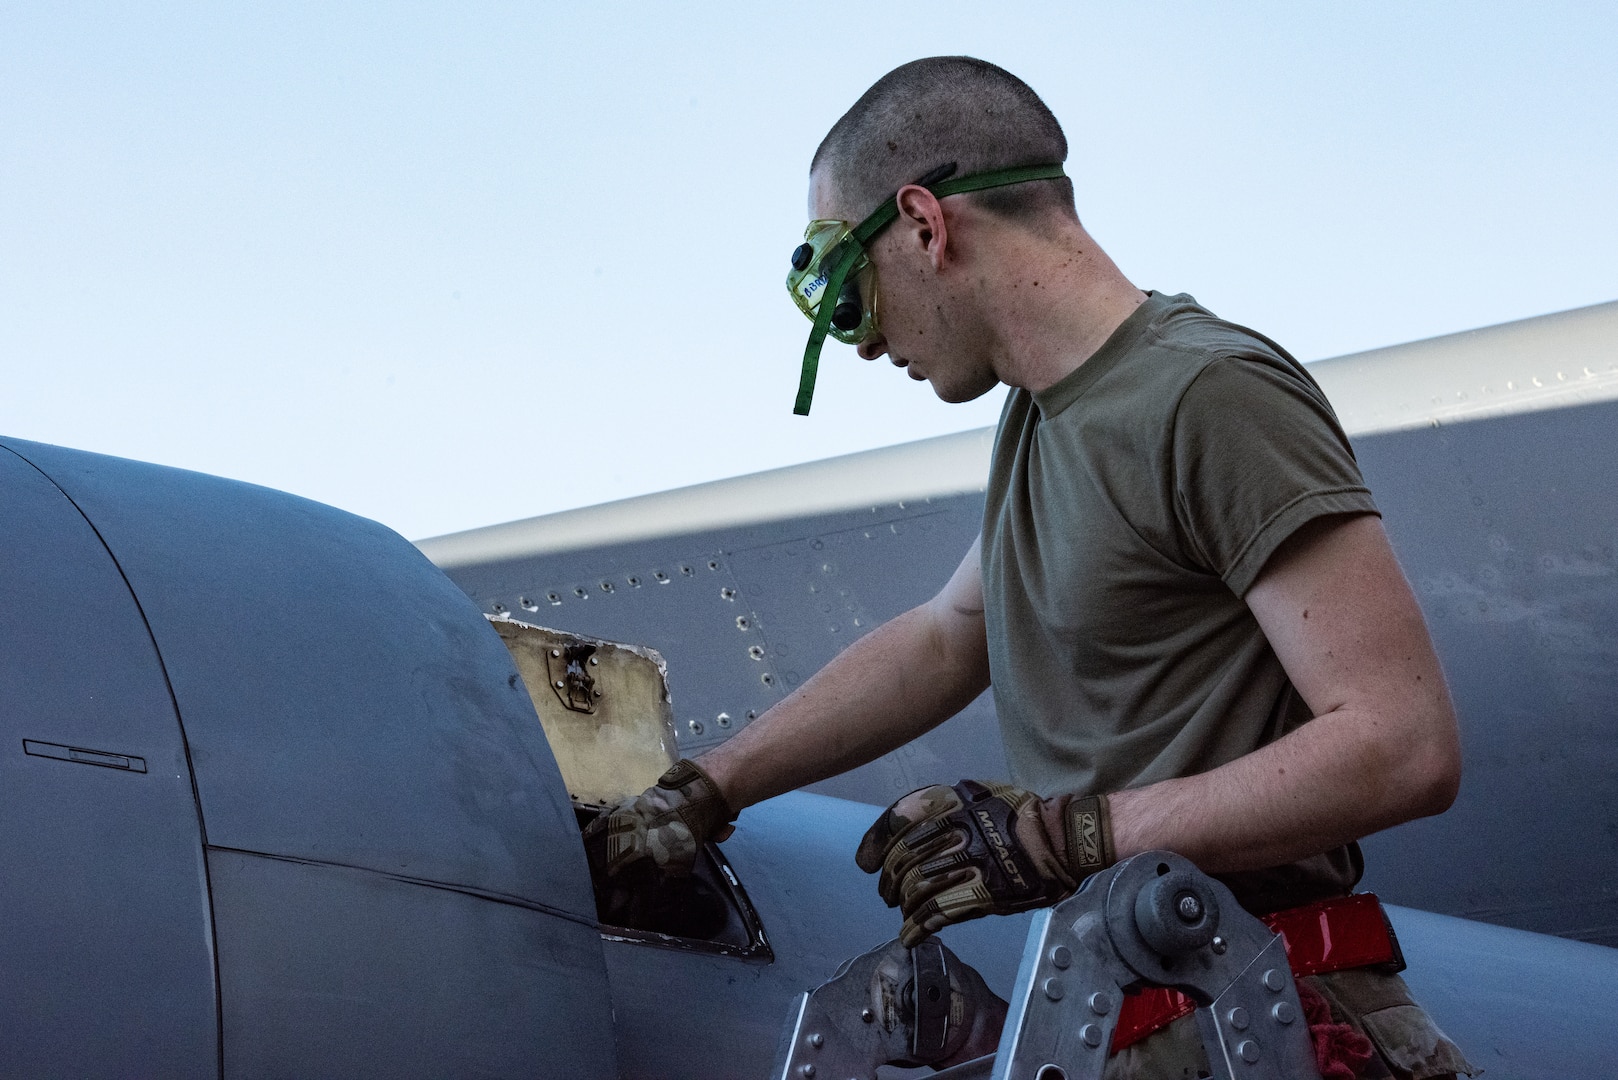 Airman 1st Class Camron Young, 2nd Aircraft Maintenance Squadron crew chief, conducts post-flight maintenance on a B-52 Stratofortress in support of a Bomber Task Force mission at Andersen Air Force Base, Guam, Feb. 9th, 2022. BTF missions demonstrate lethality and interoperability in support of a free and open Indo-Pacific. (U.S. Air Force photo by Senior Airman Jonathan E. Ramos)